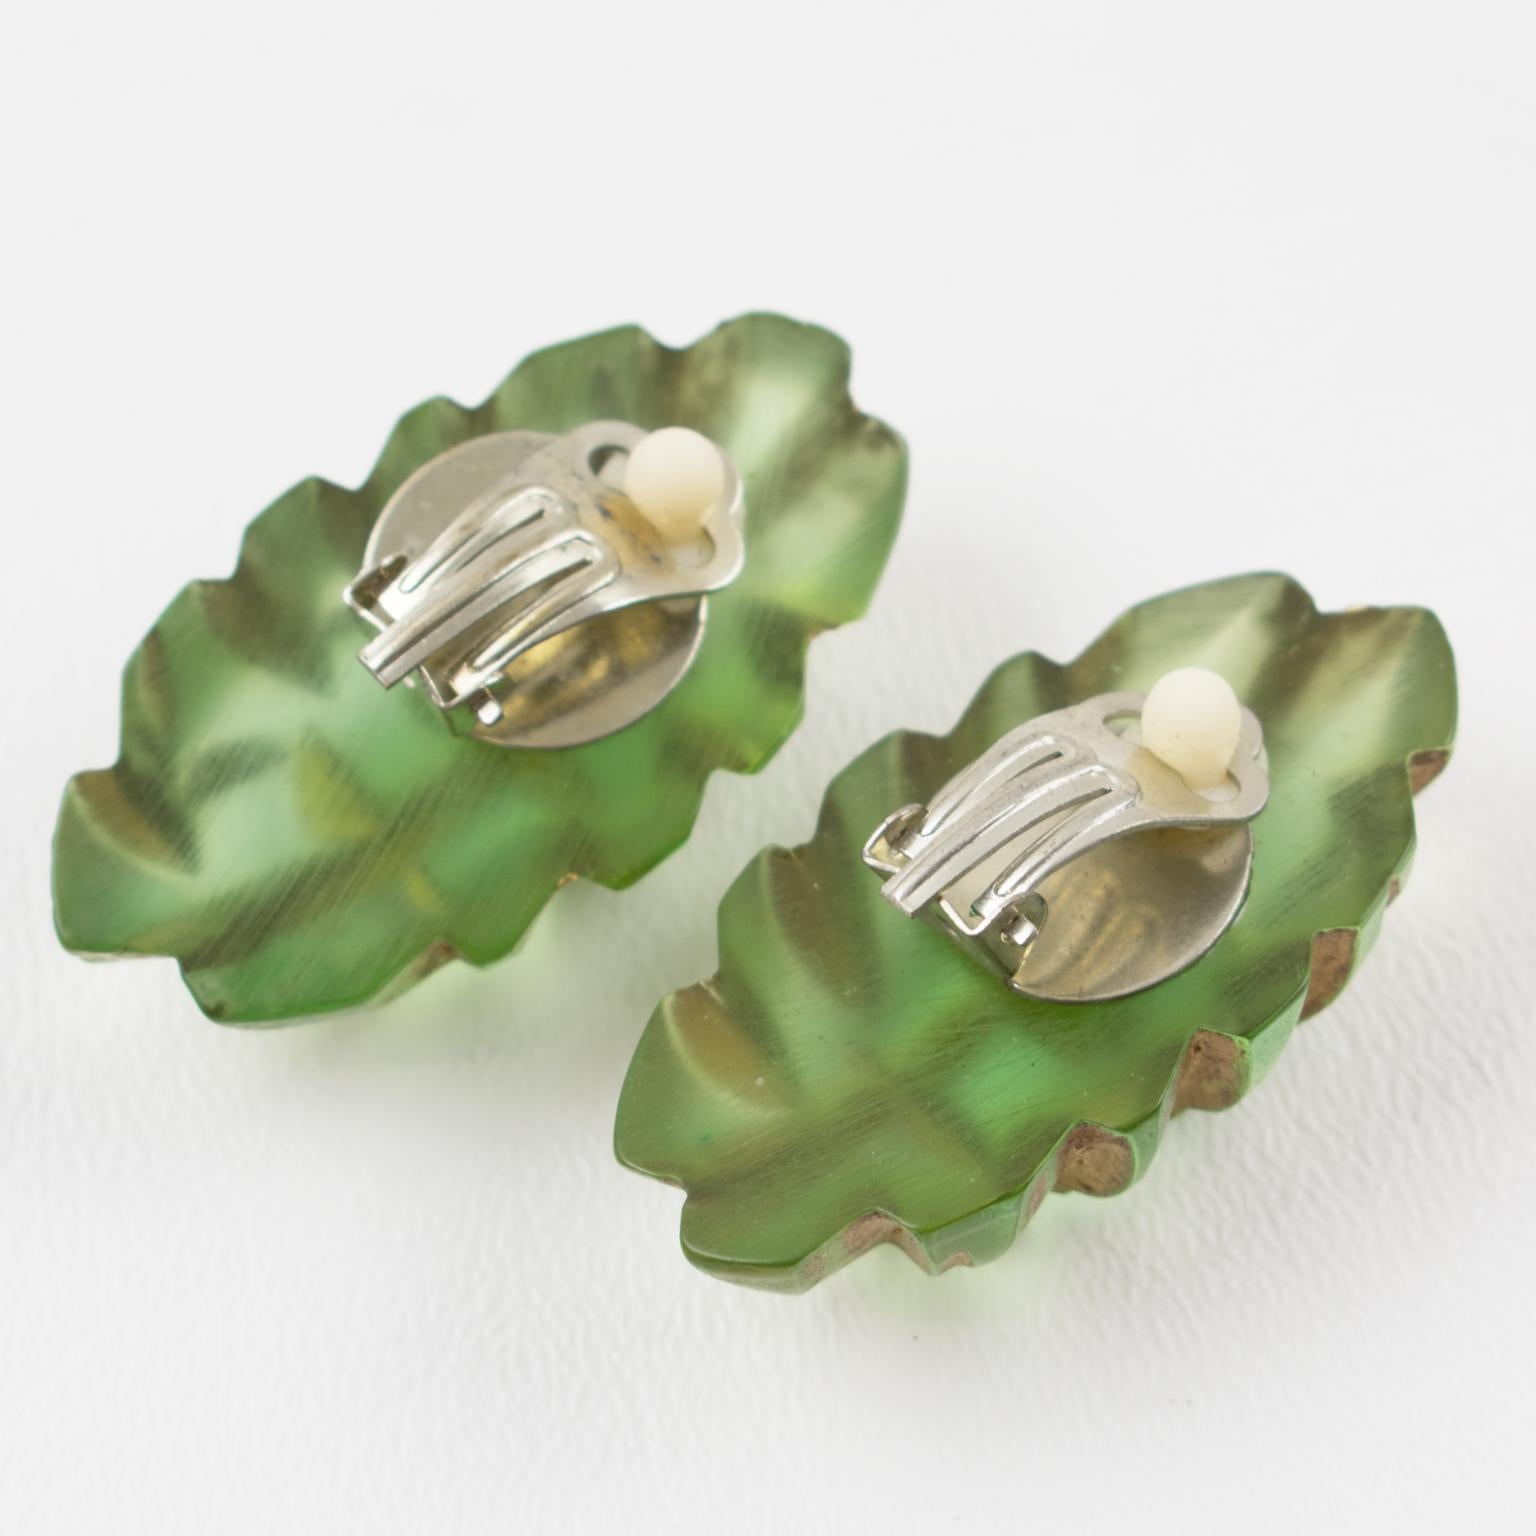 Translucent Green Lucite Clip Earrings with Gilt Application Carving In Excellent Condition For Sale In Atlanta, GA